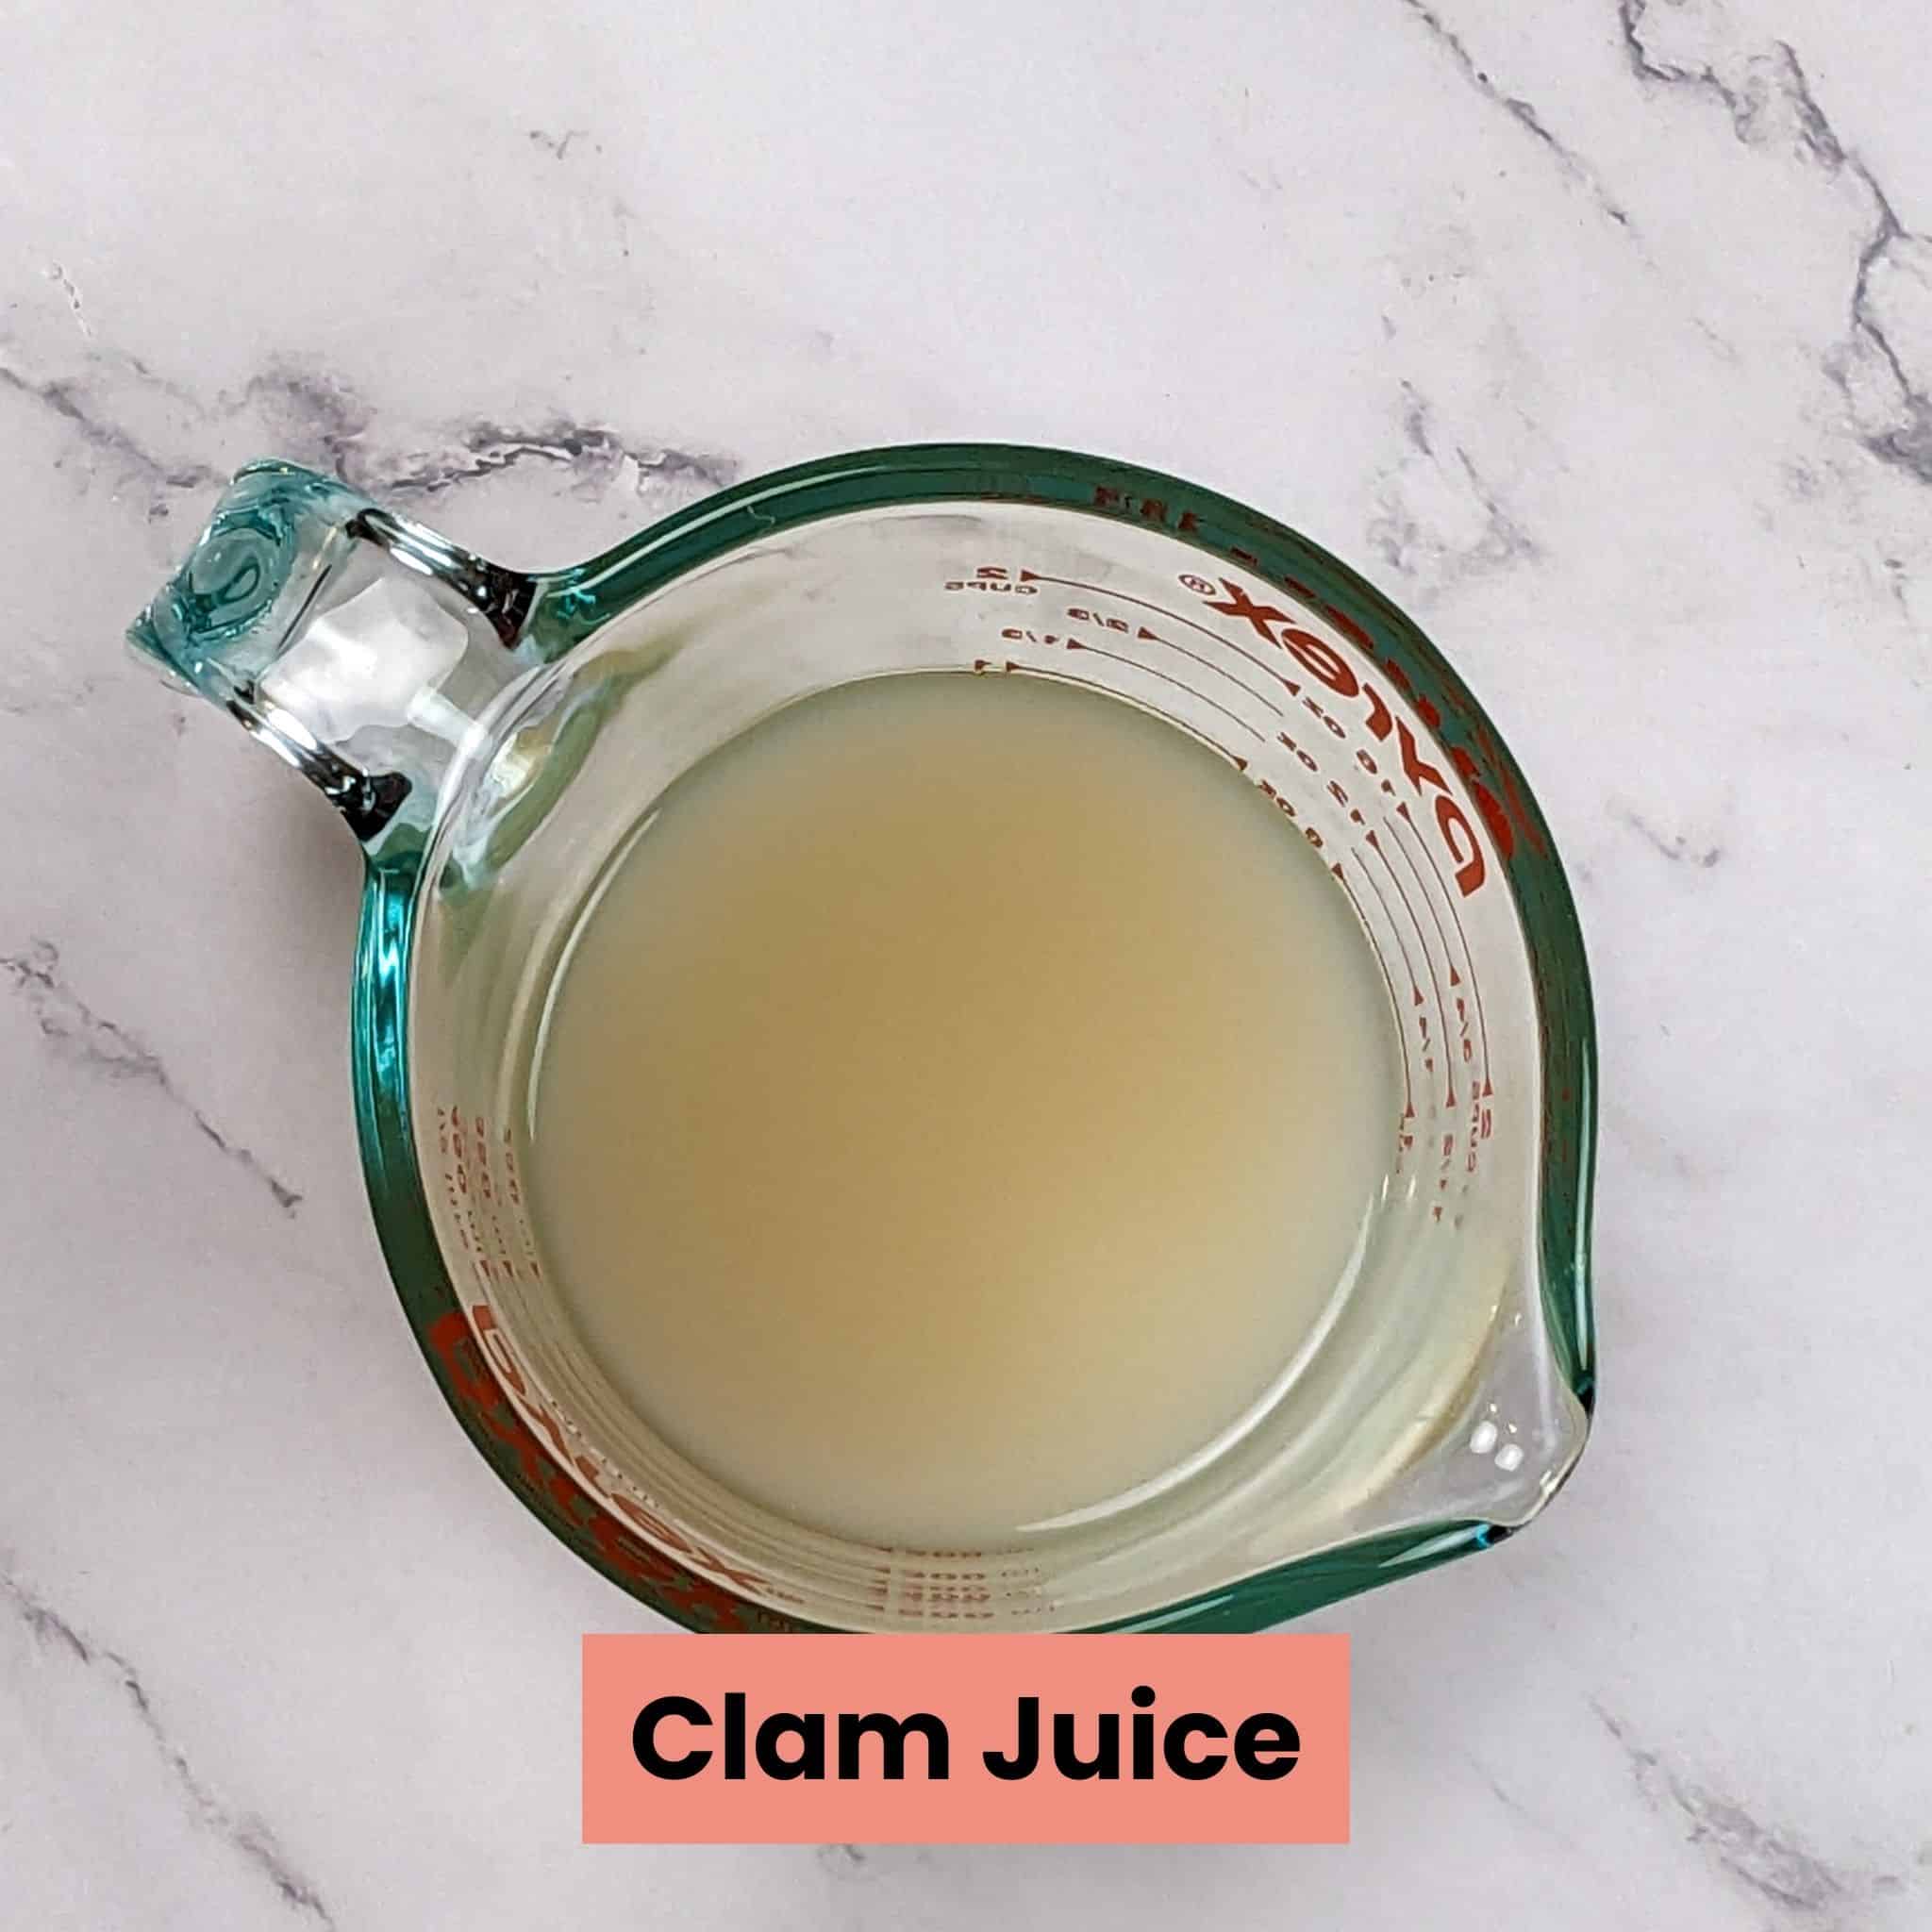 clam juice in a glass pyrex measuring cup.